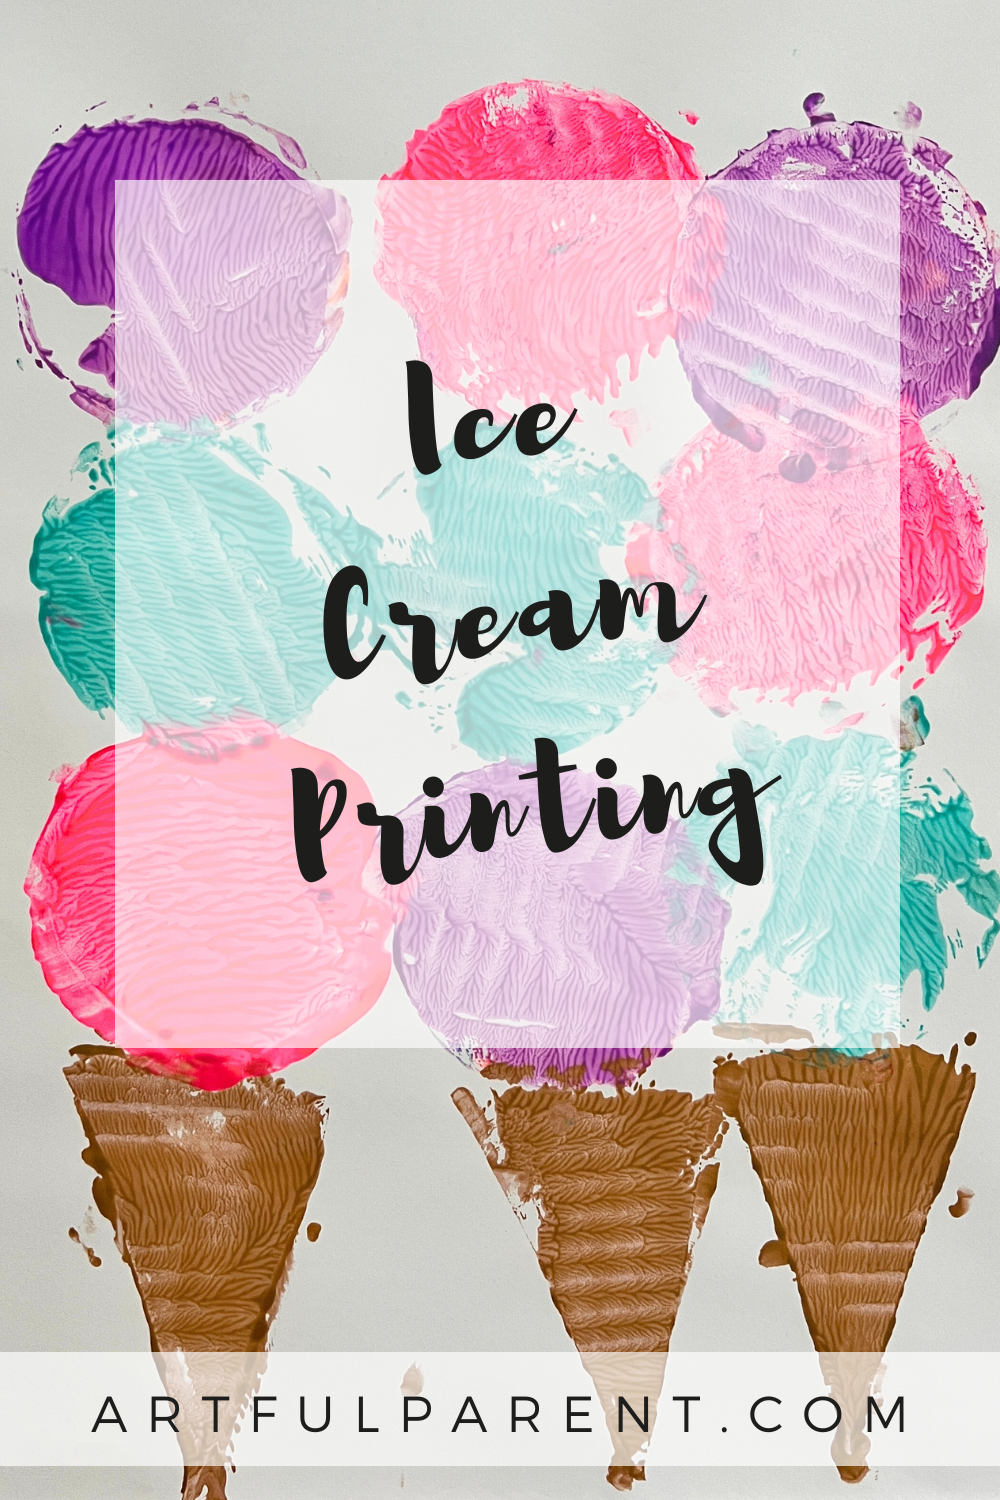 How to Make an Ice Cream Craft for Kids